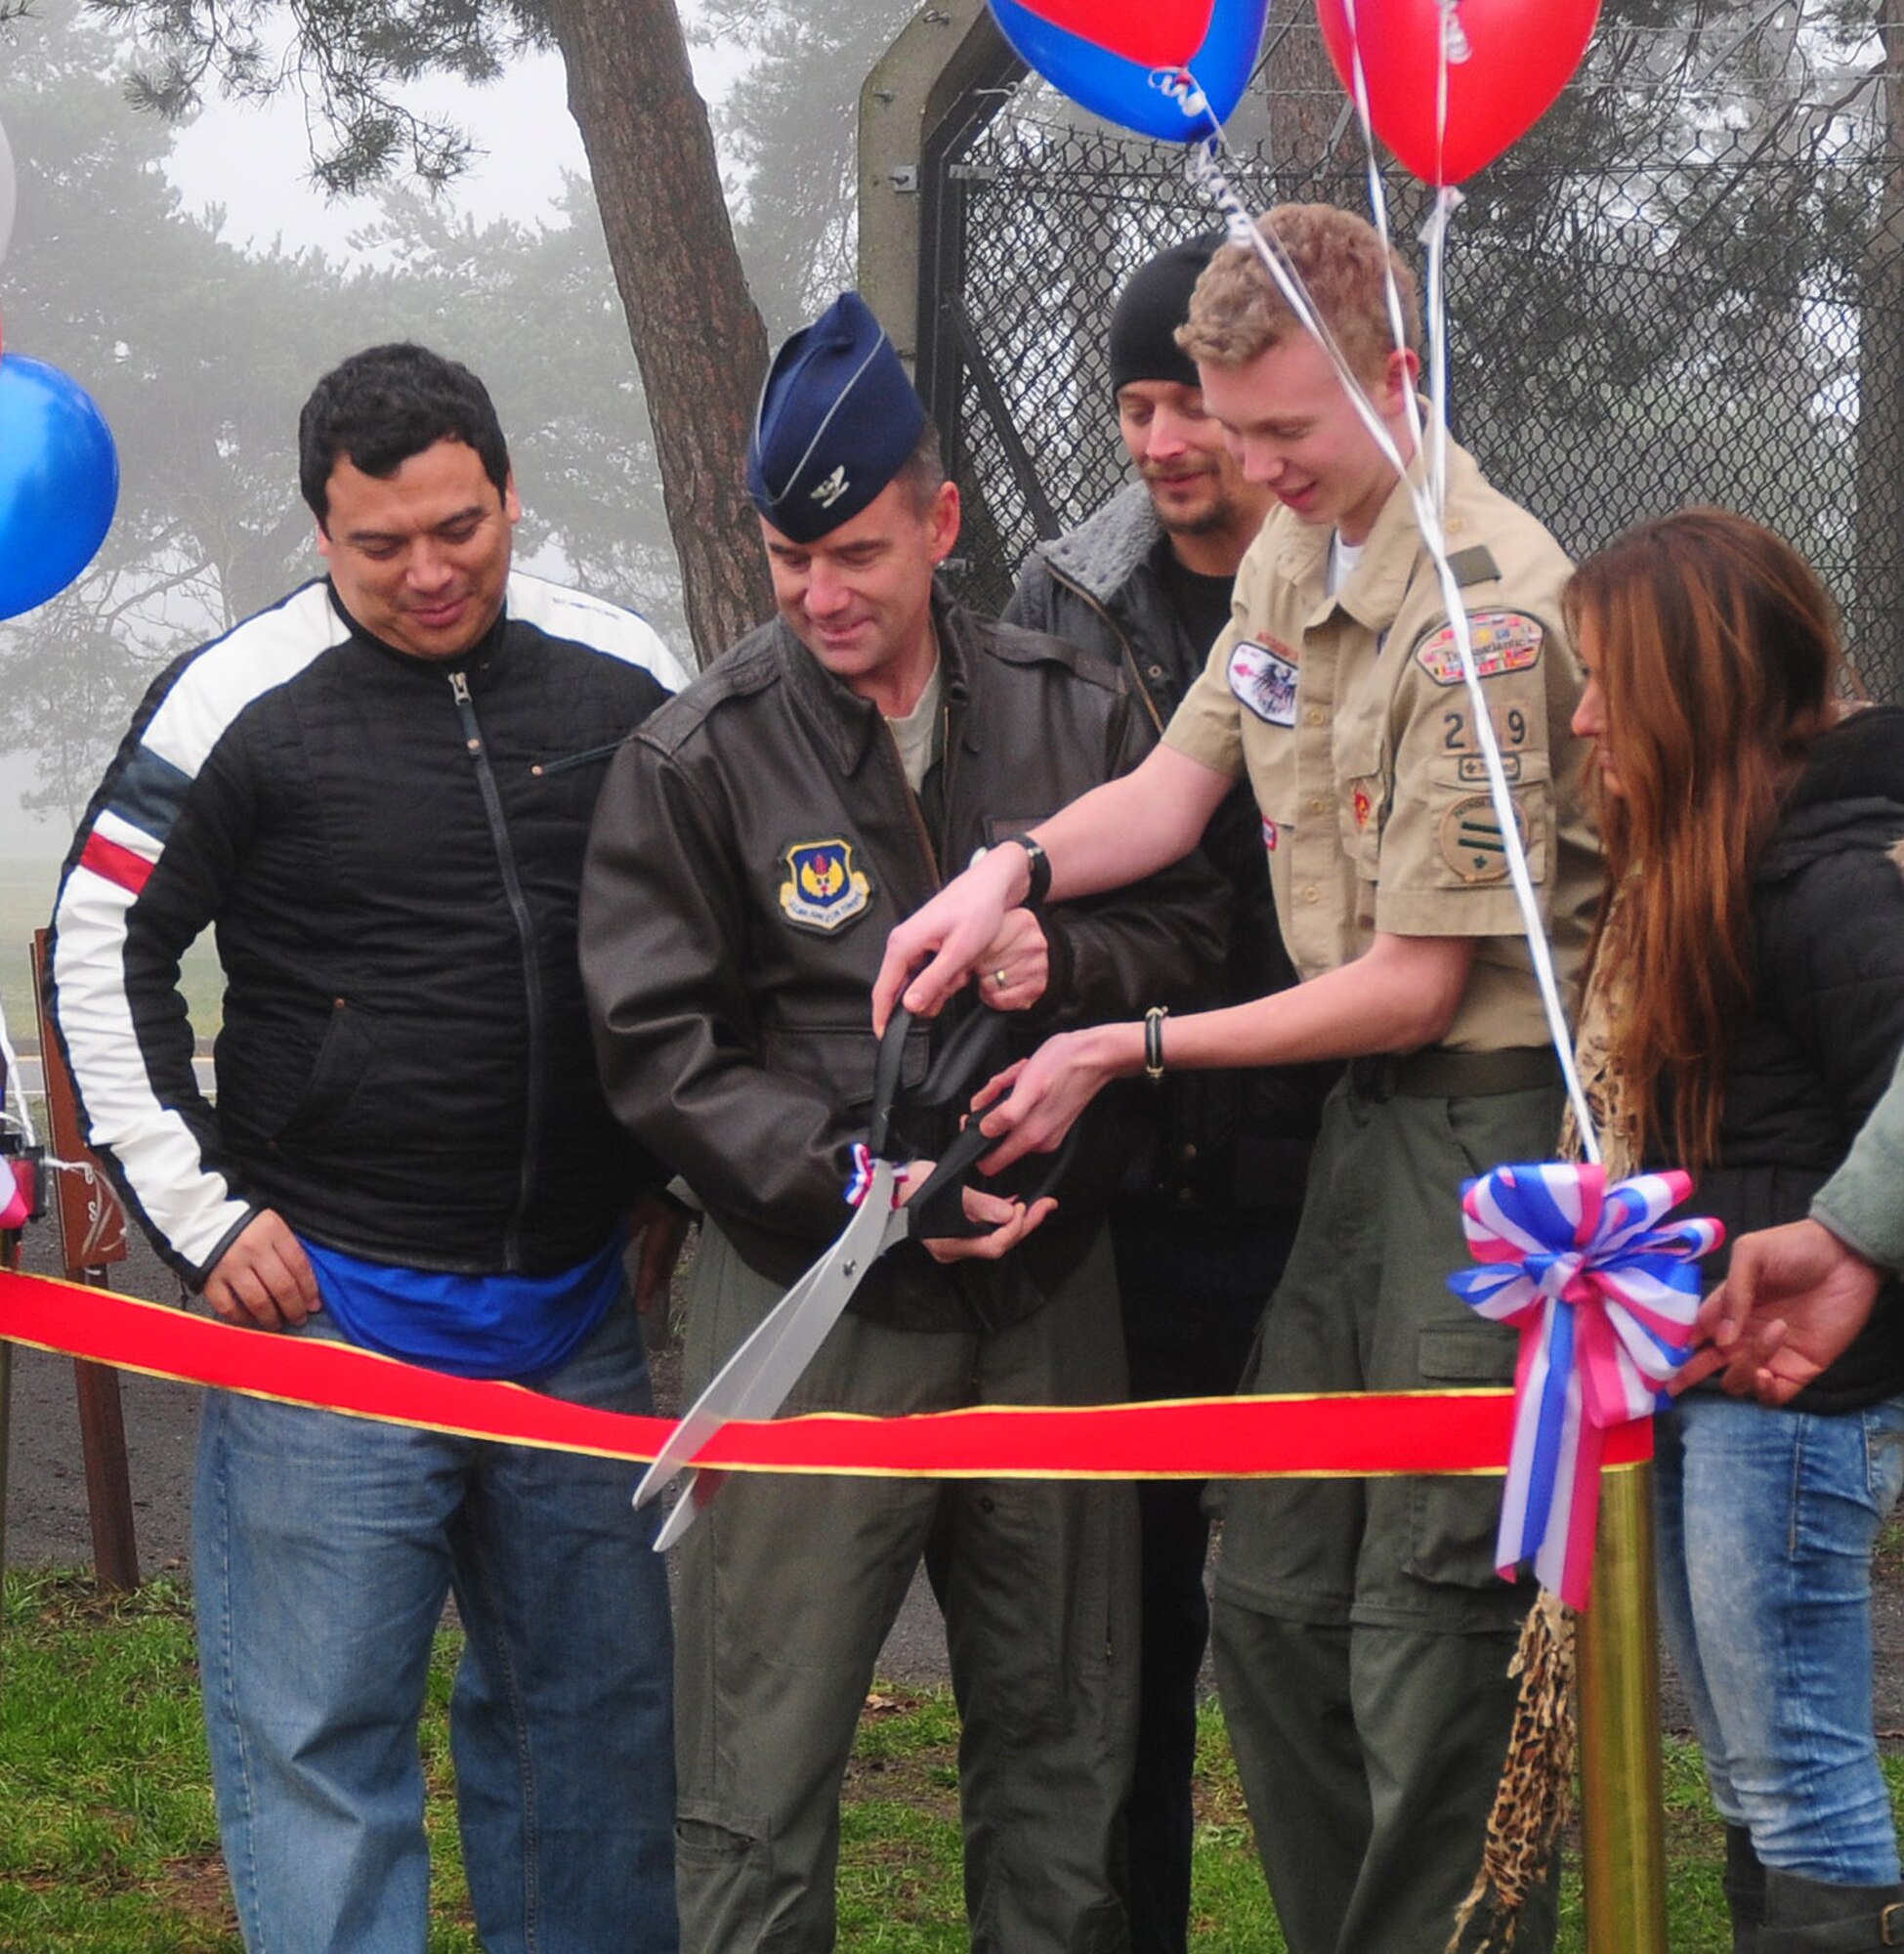 Joshua Kent, with the help of 48th Fighter Wing Commander Col. Jay Silveria, cut the ribbon during the ceremony to open brand new fitness stations at RAF Lakenheath, England, Dec. 11.  Entertainers Carlos Mencia (left) Kid Rock (middle) and Jessie James (right) were also in attendance.  Joshua Kent, a boy scout with Troop 219 here, initiated this project to earn his Eagle Scout badge.   The 15 new fitness stations can be found along the RAF Lakenheath running trail.  (U.S. Air Force photo by Staff Sgt. Connor Estes).    